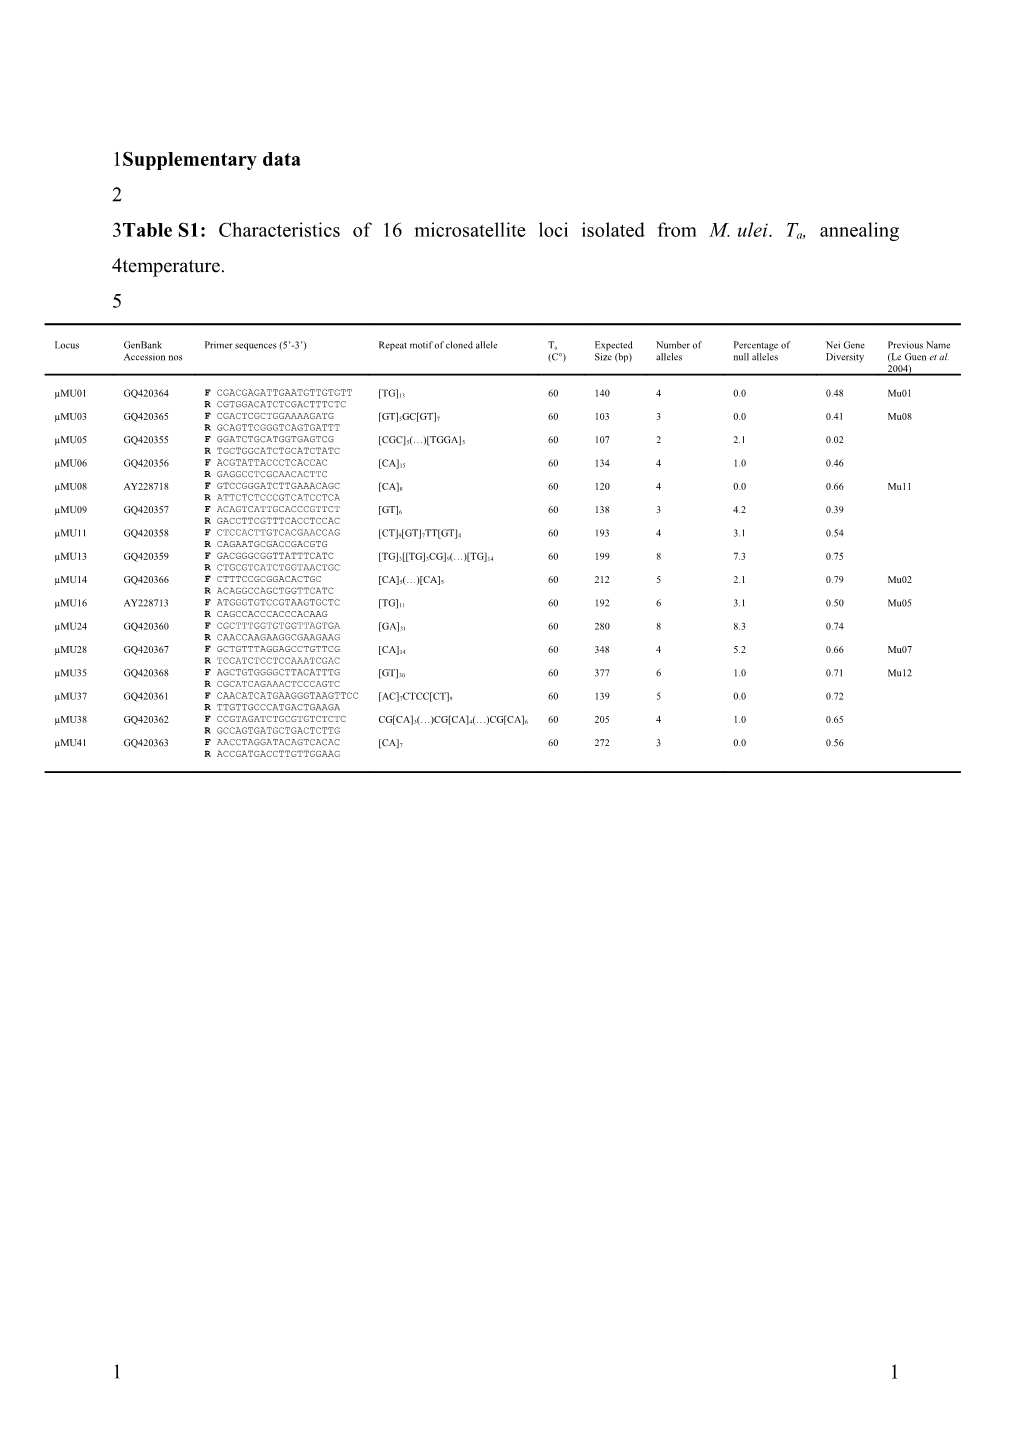 Table 1: Characteristics of Microsatellite Loci Isolated from M